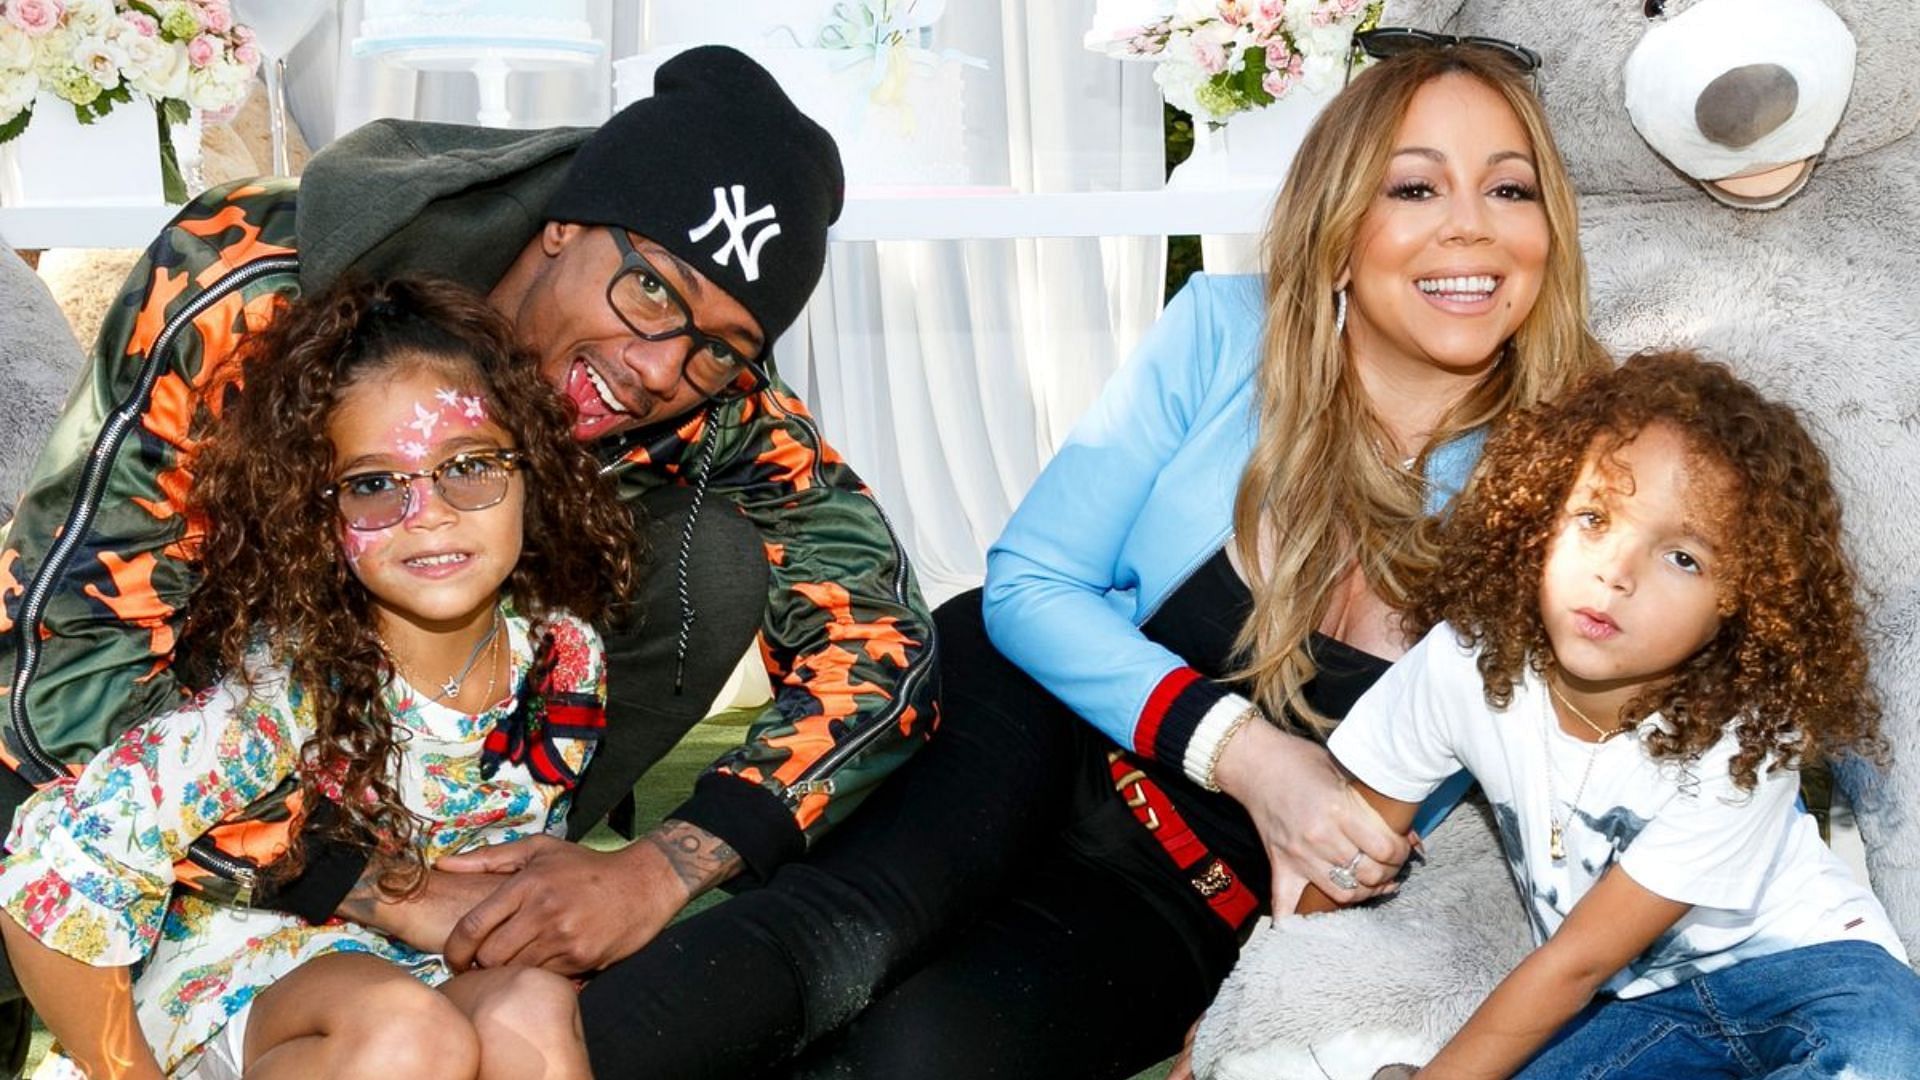 Nick Cannon and Mariah Carey with their kids. (Image via Filmmagic/Getty Images)